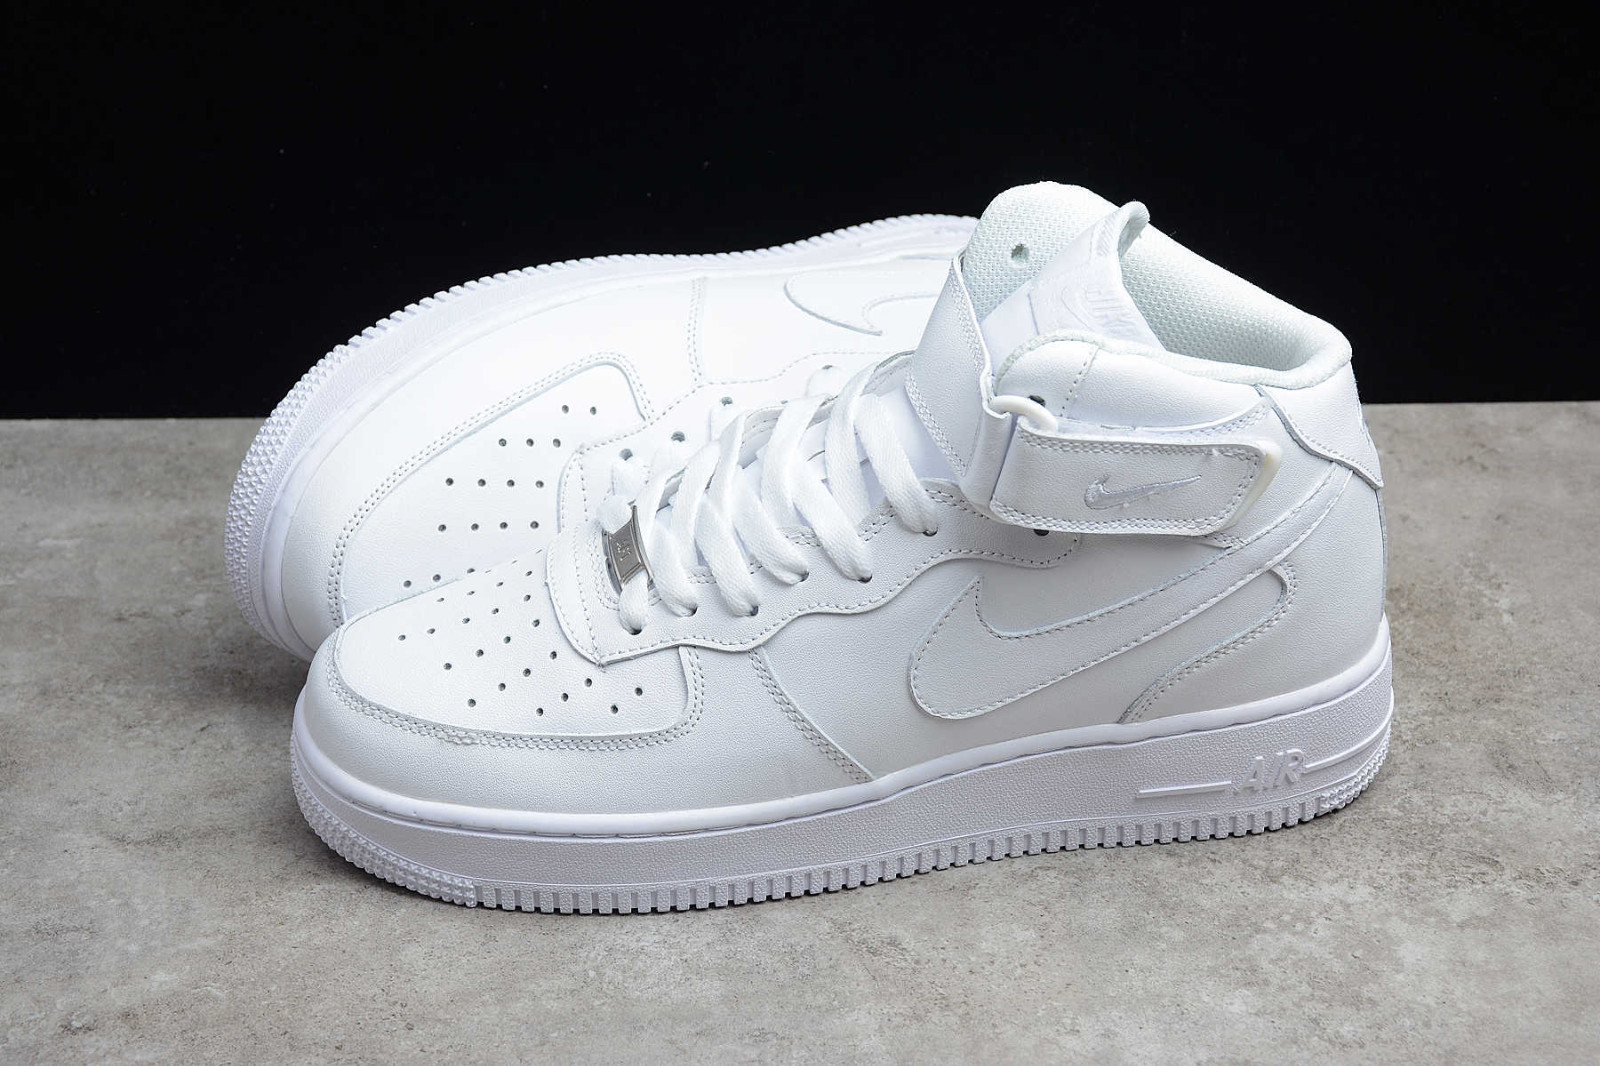 Nike Air Force 1 Mid '07 sneakers in white and gray